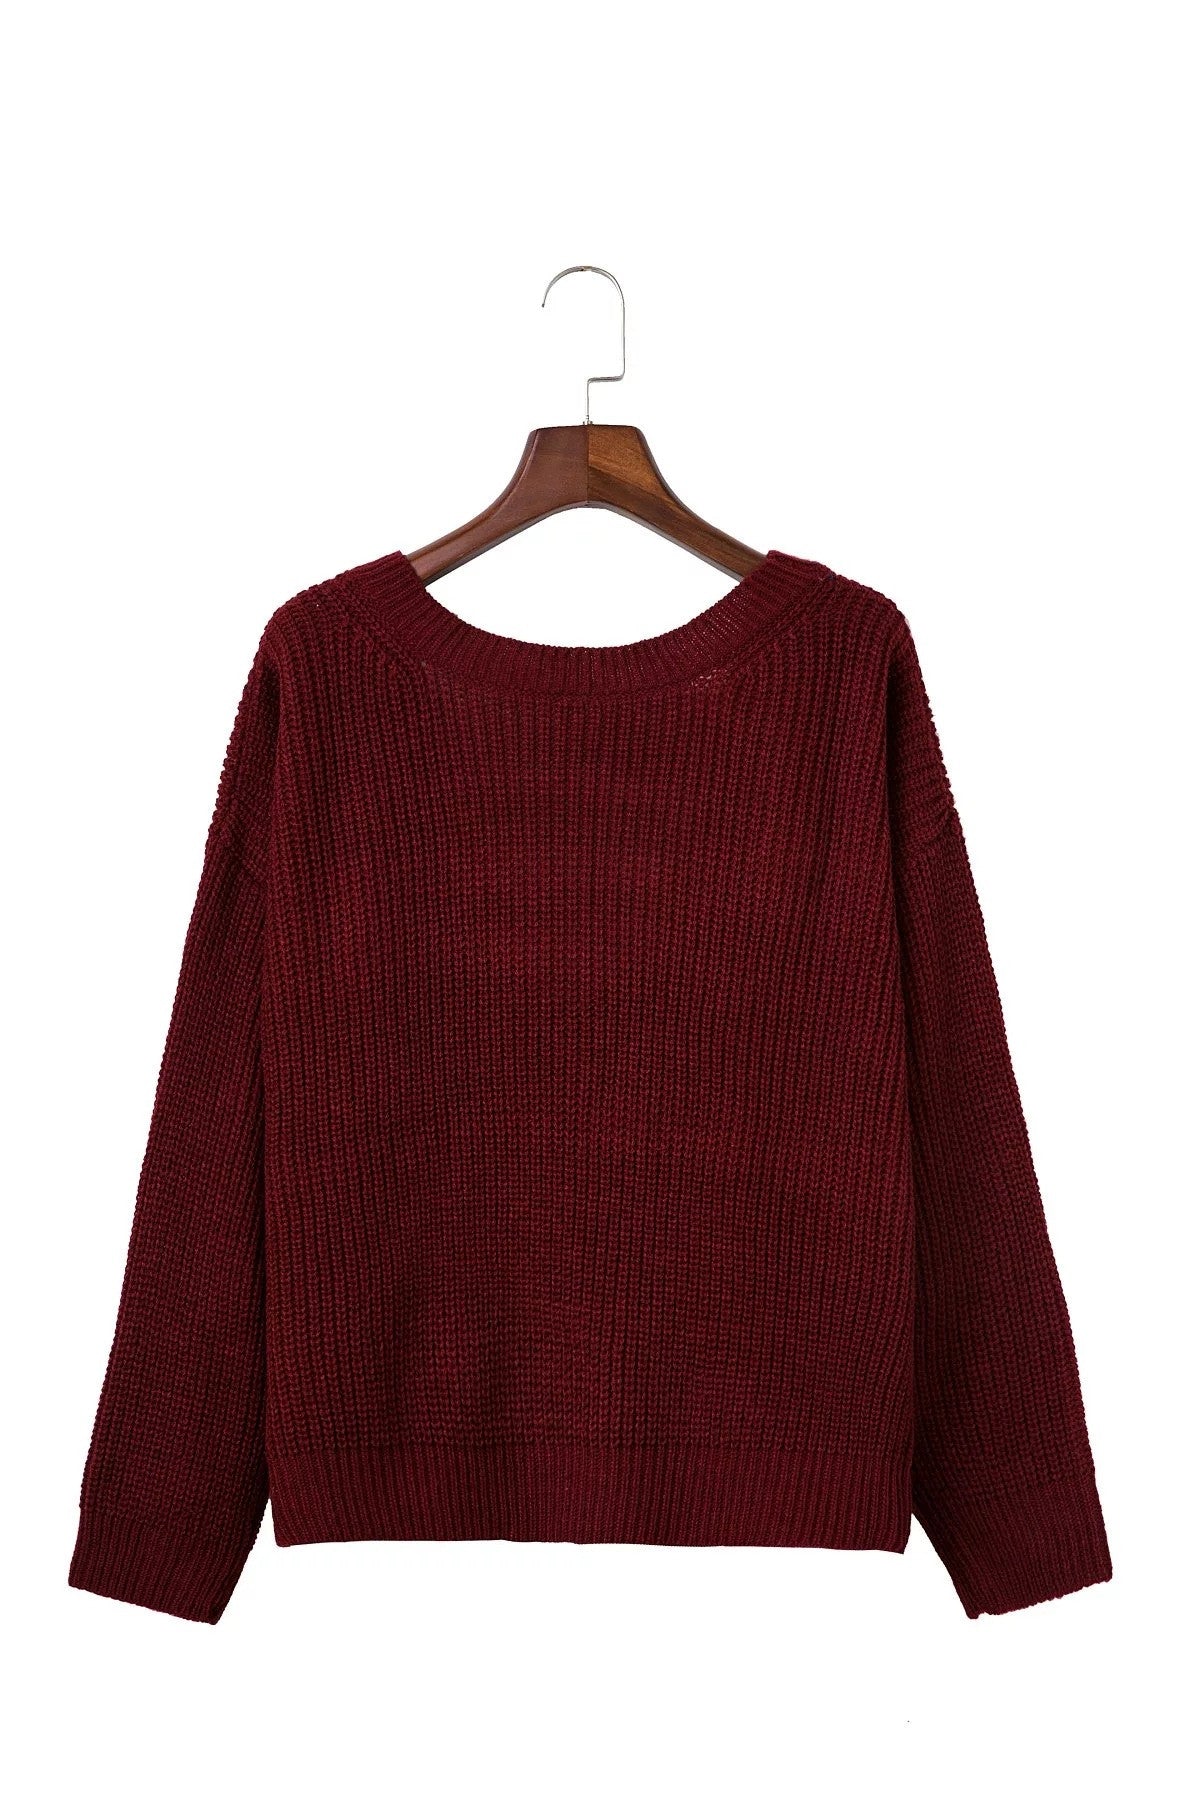 Sexy Deep V Neck Knitting Sweater - Oh Yours Fashion - 8